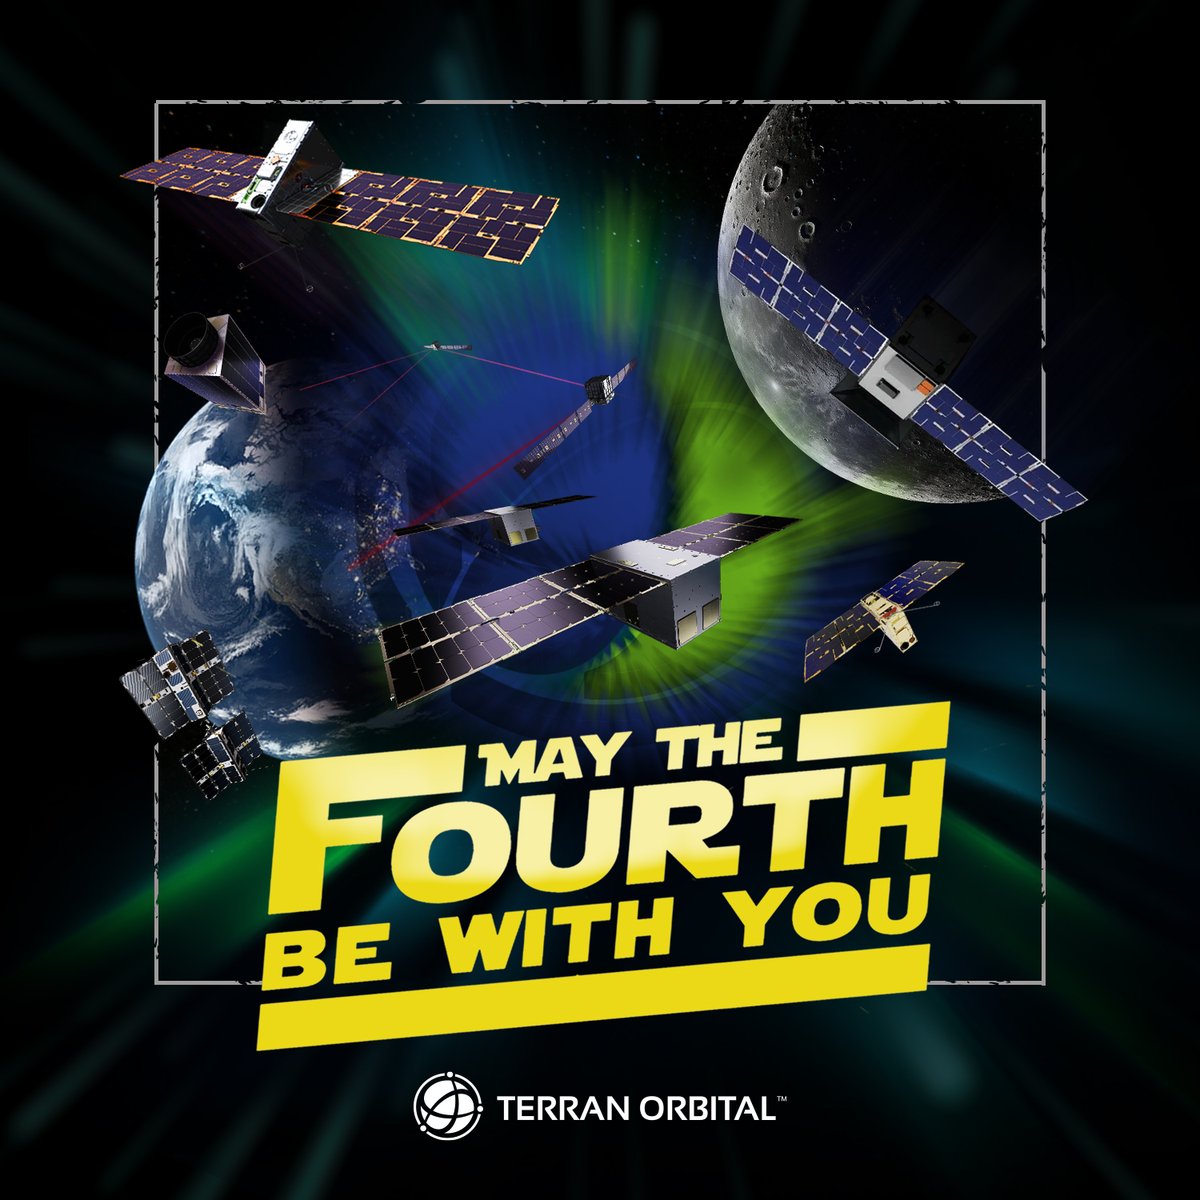 May the Fourth be with you! 

Today, we're not just celebrating Star Wars Day, we're celebrating the force of enthusiasm our incredible team brings to the galaxy! 

#TerranOrbital #StarWarsDay #TeamSpirit #MayThe4thBeWithYou